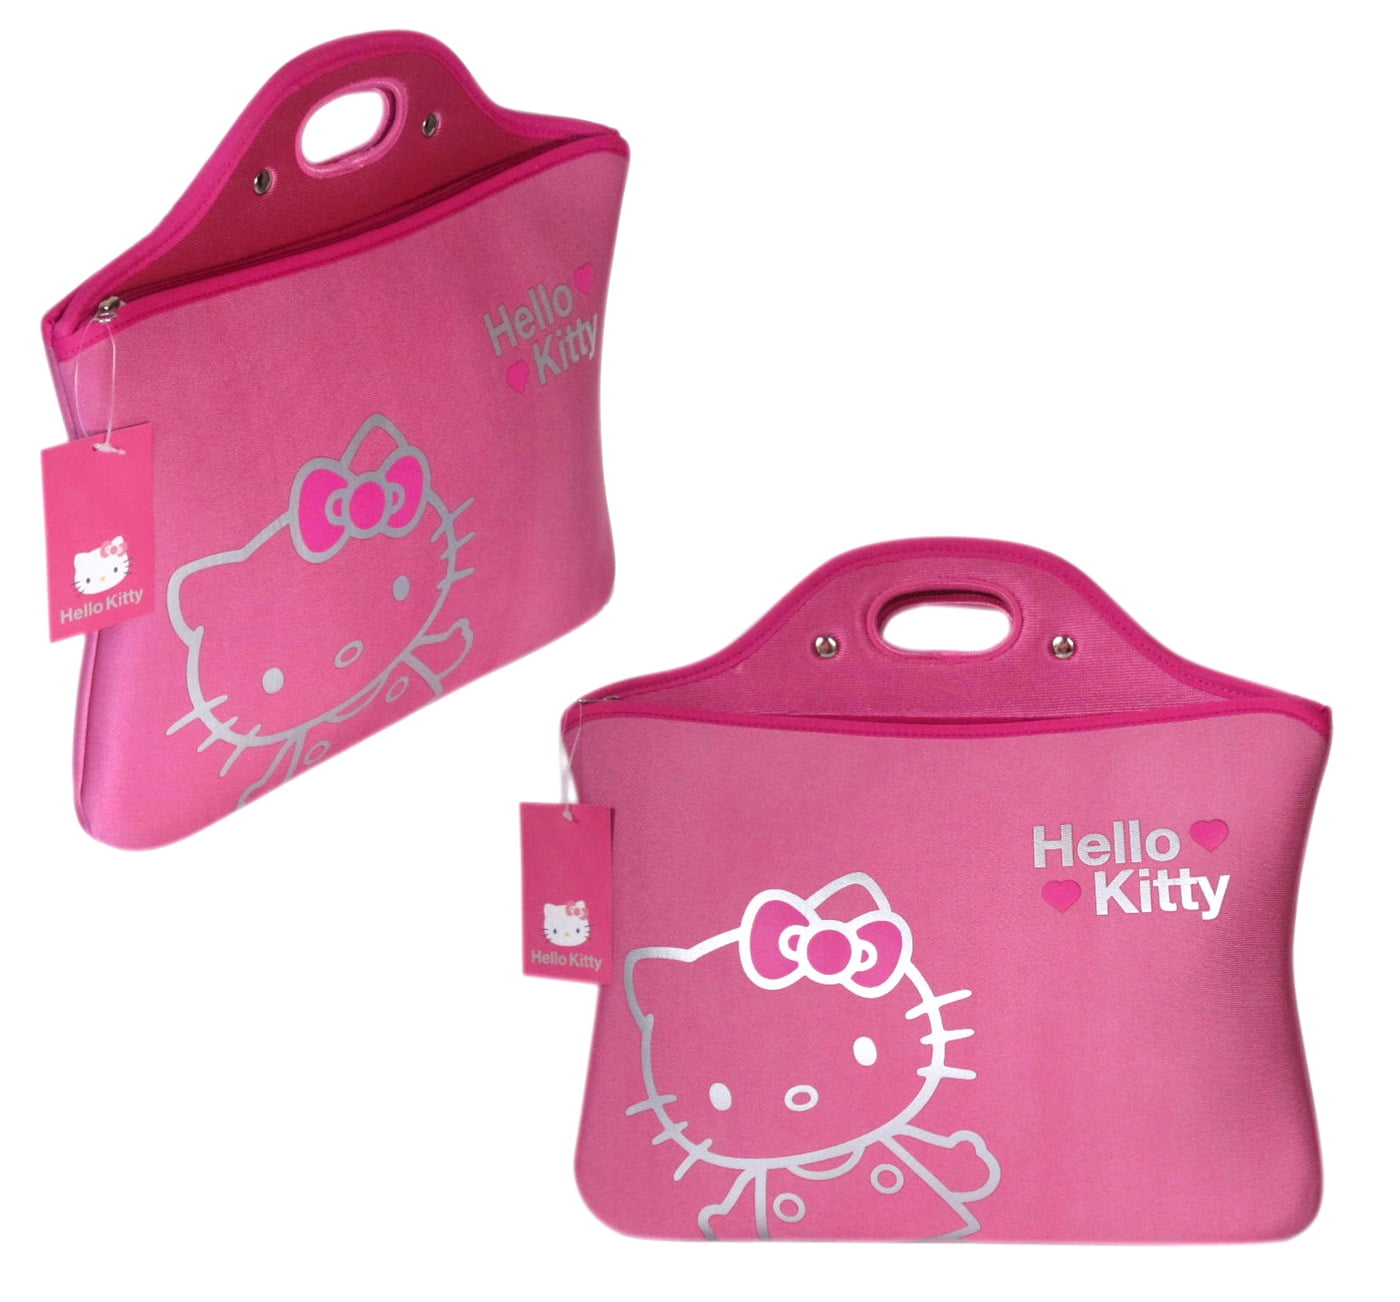 14 Inch Laptop Bag Hello Kitty Holds A Cup Laptop Briefcase Shoulder Messenger Bag Case Sleeve 